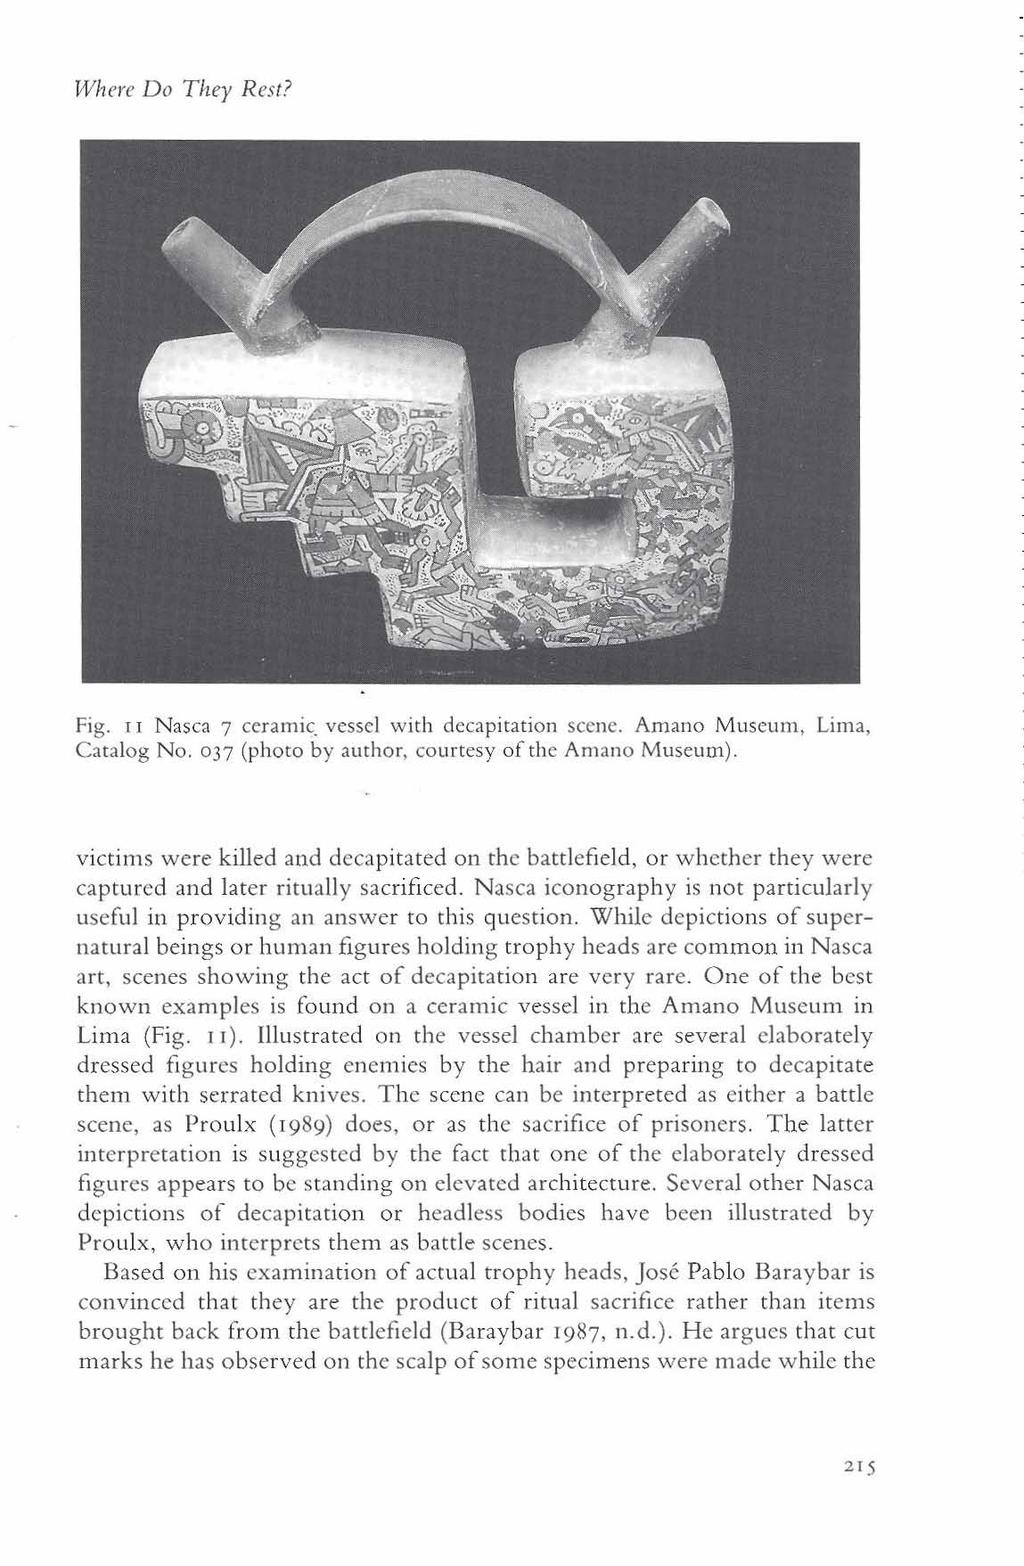 Where Do They Rest? I Fig. 11 Nasca 7 ceramic. vessel with decapitation scene. Amano Museum, Lima, Catalog No. 037 (photo by author, courtesy of the Amano Museum).